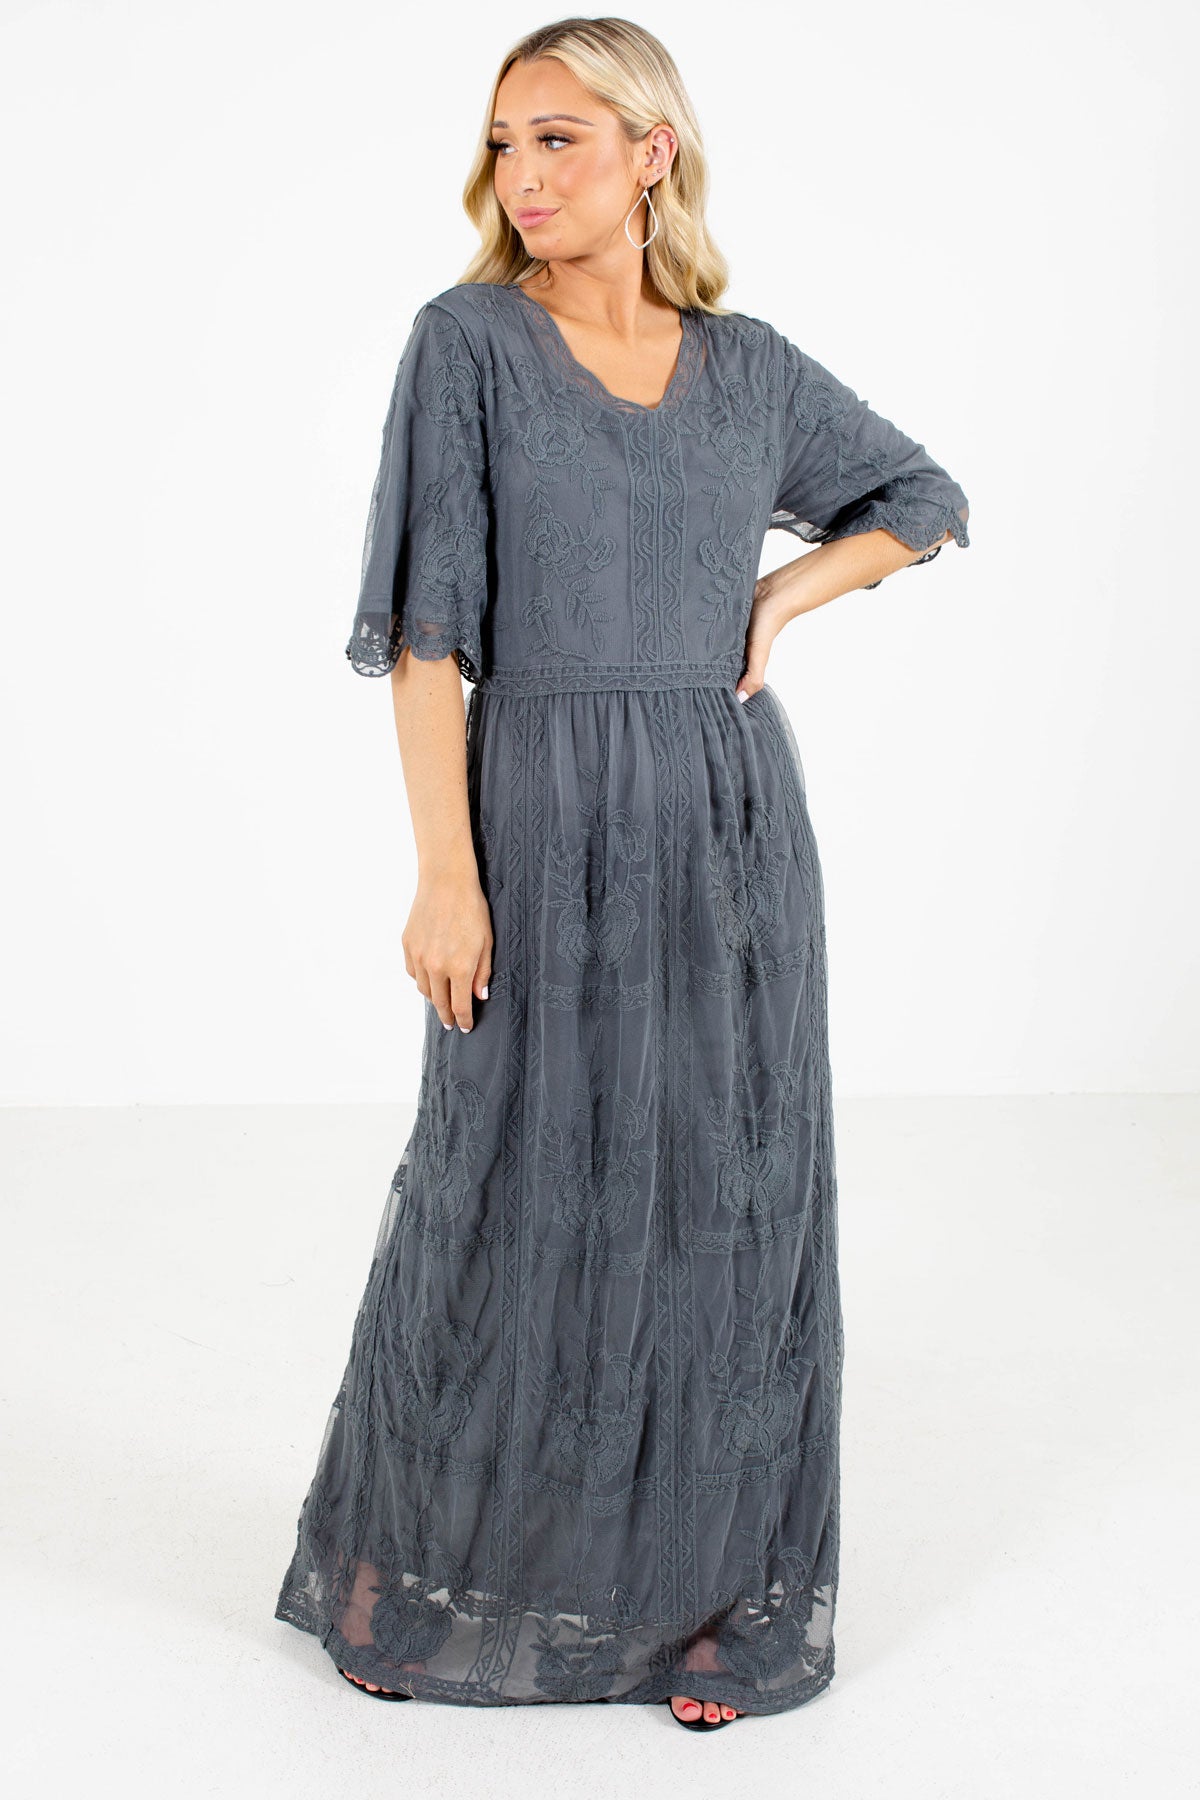 Gray Lace Overlay Boutique Maxi Dresses for Women